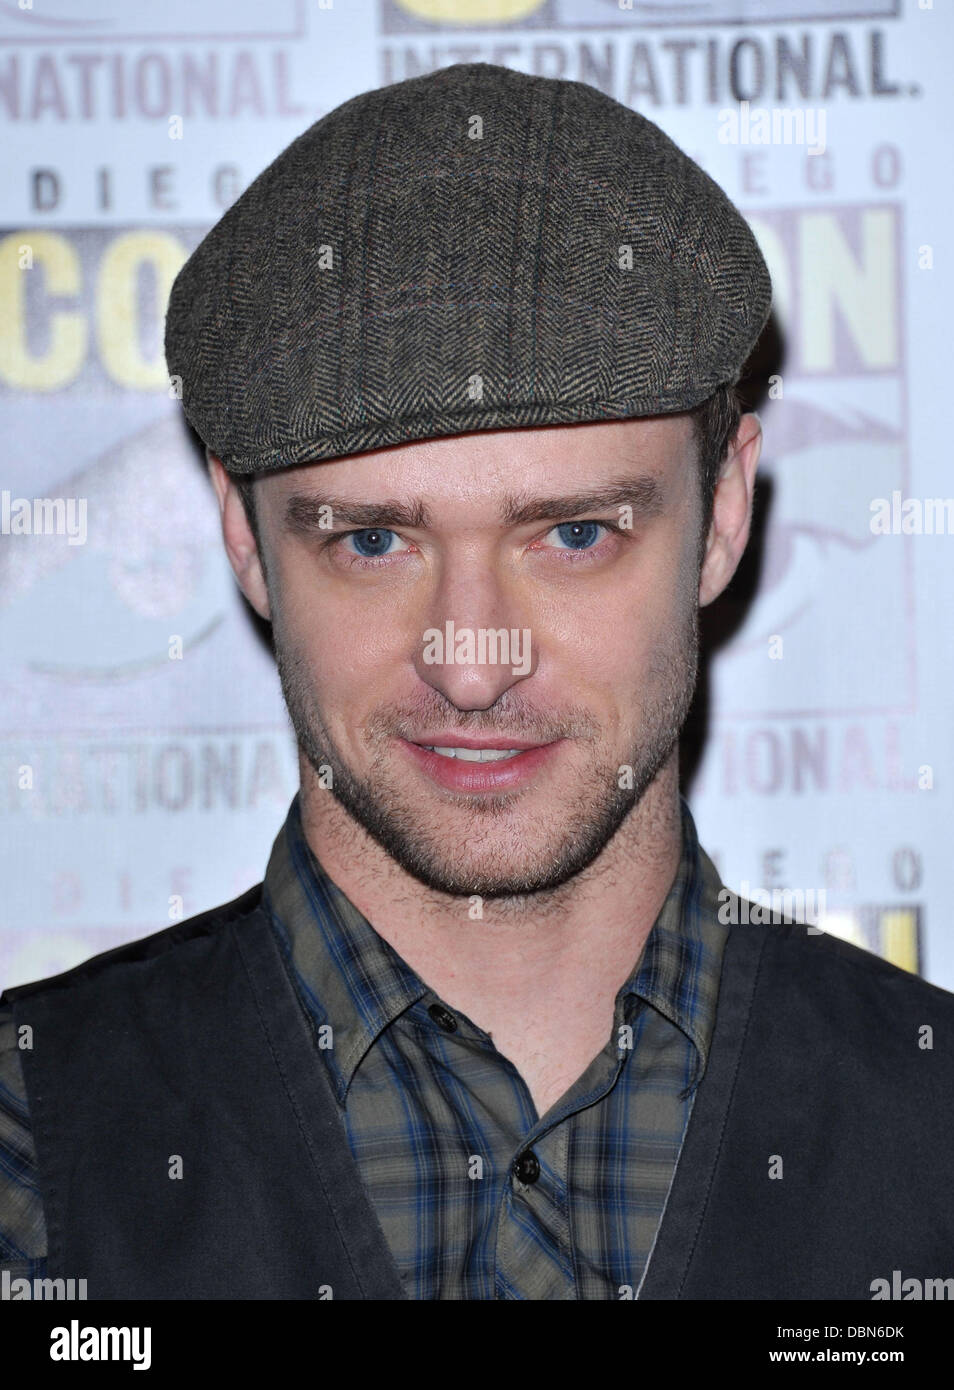 Justin Timberlake 2011 Comic-Con Convention - Day 1 - 'In Time' press conference at the Hilton Bayfront - Arrivals San Diego, California - 21.07.11 Stock Photo